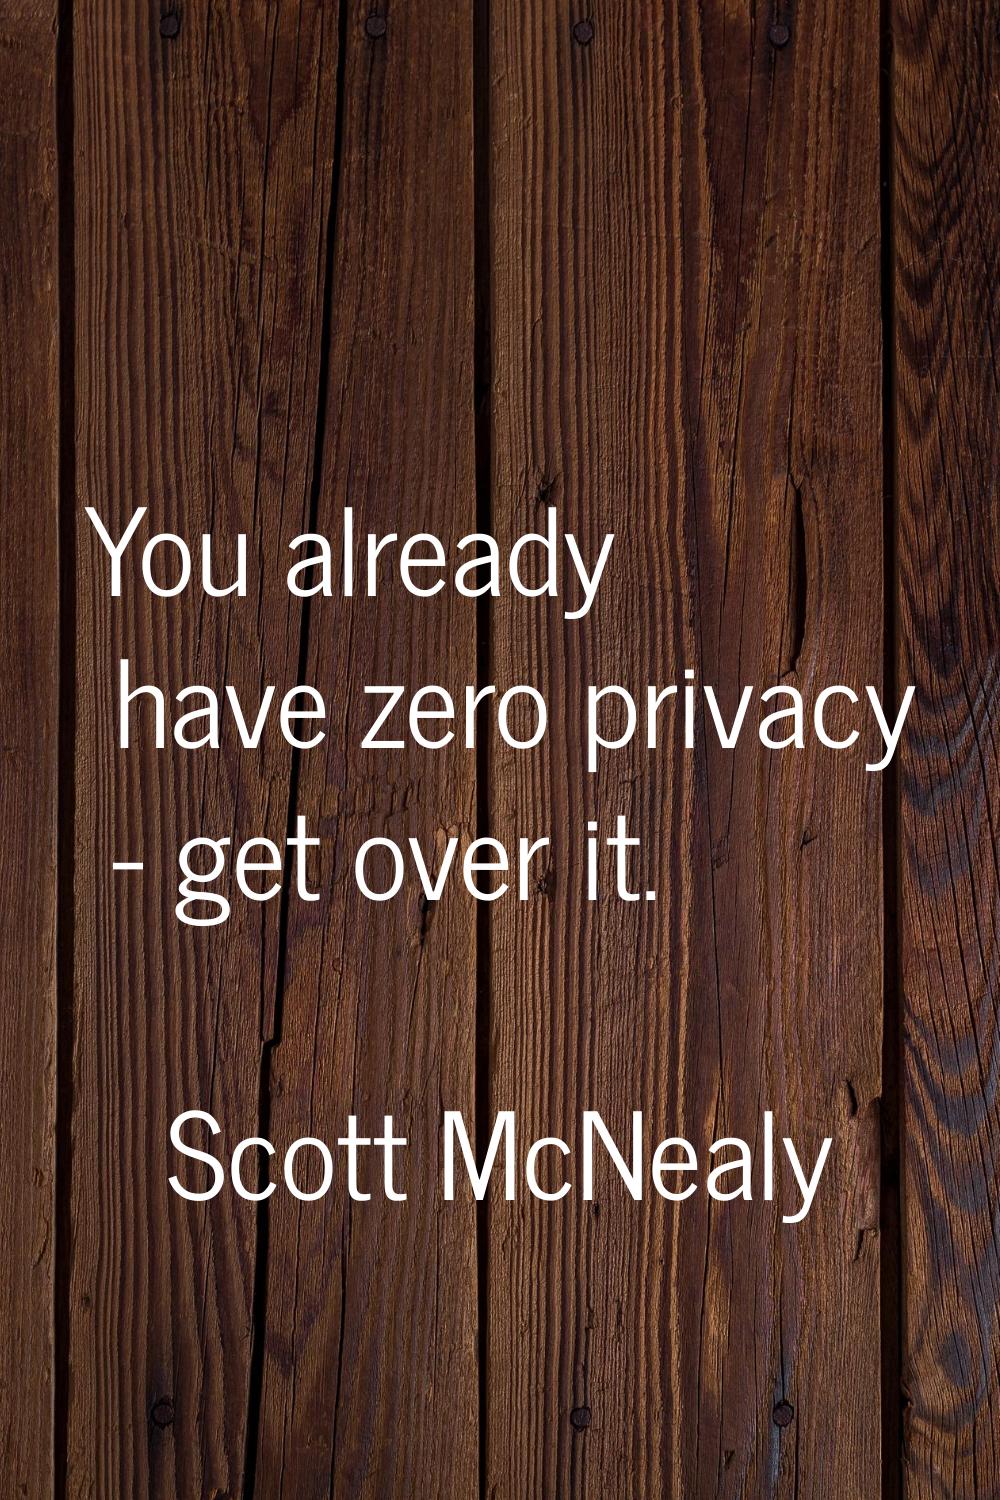 You already have zero privacy - get over it.